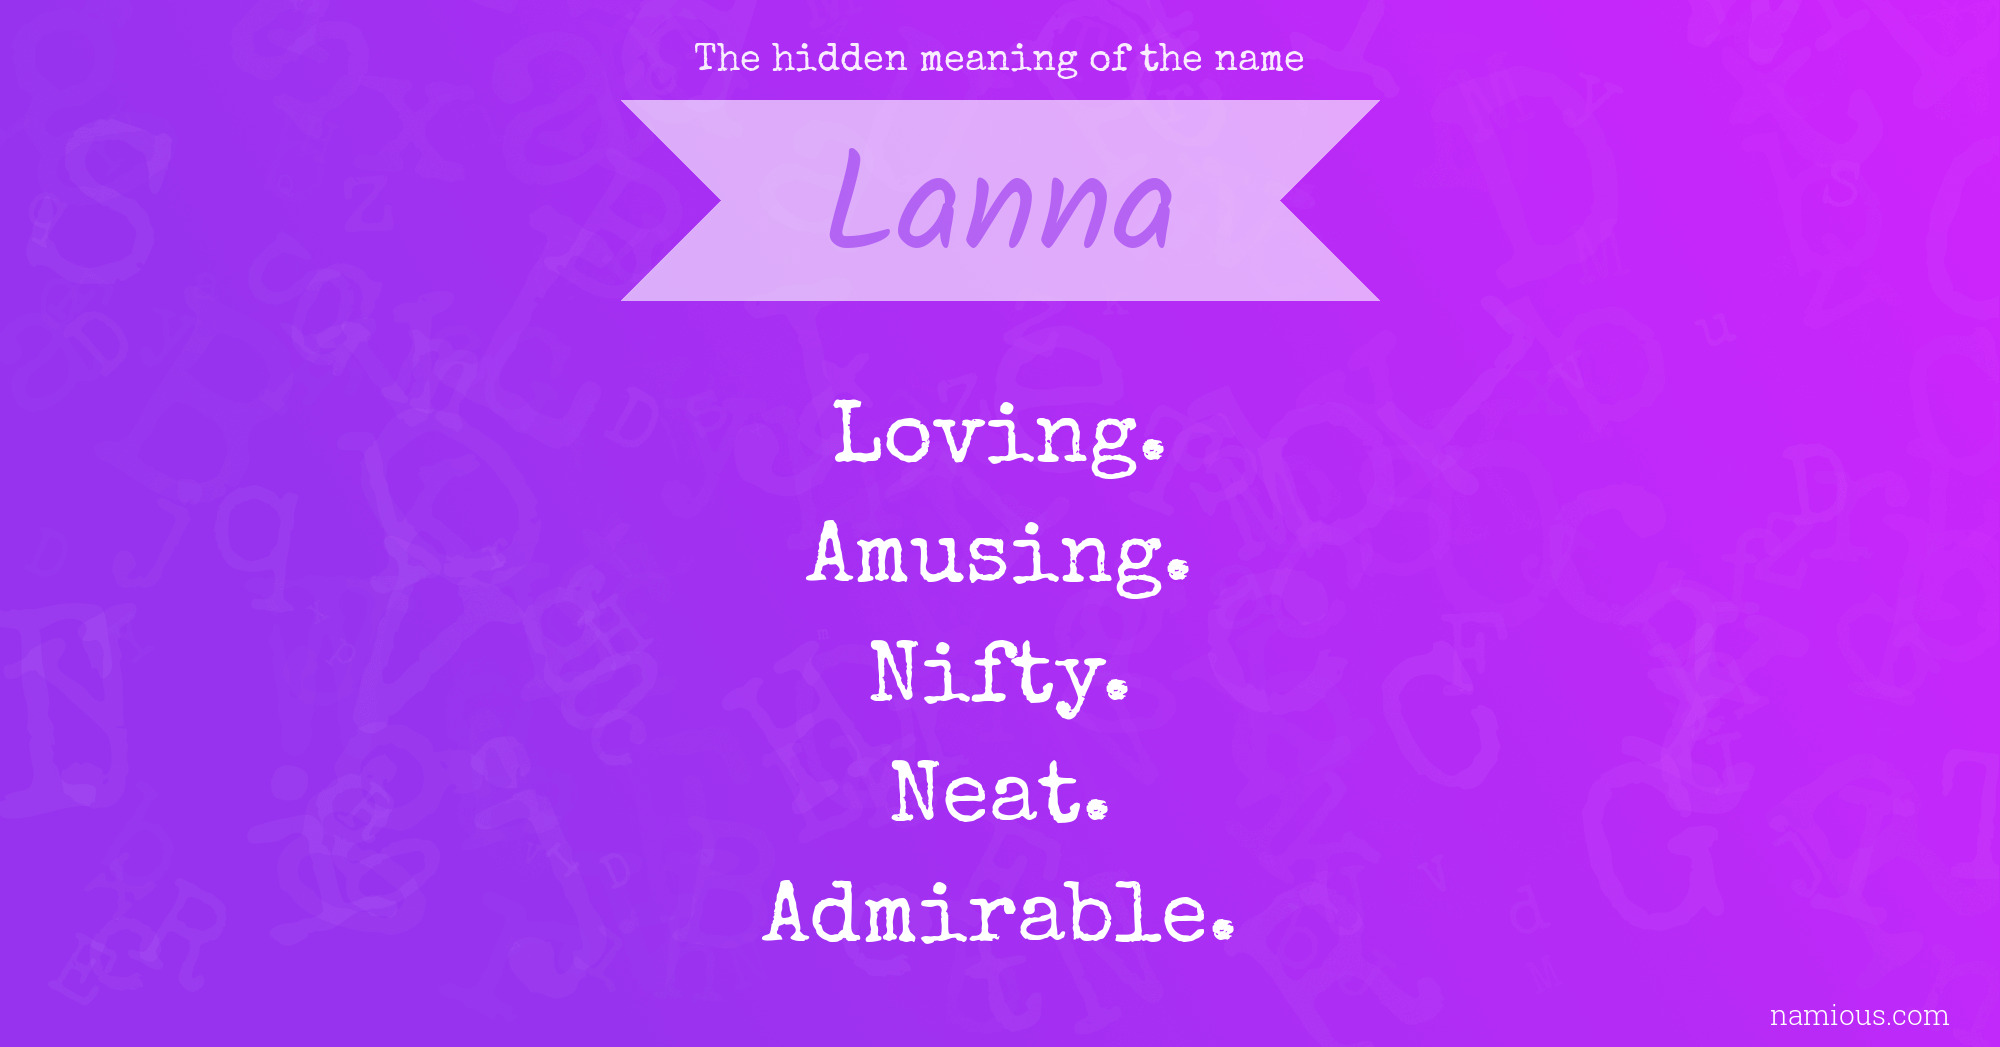 The hidden meaning of the name Lanna